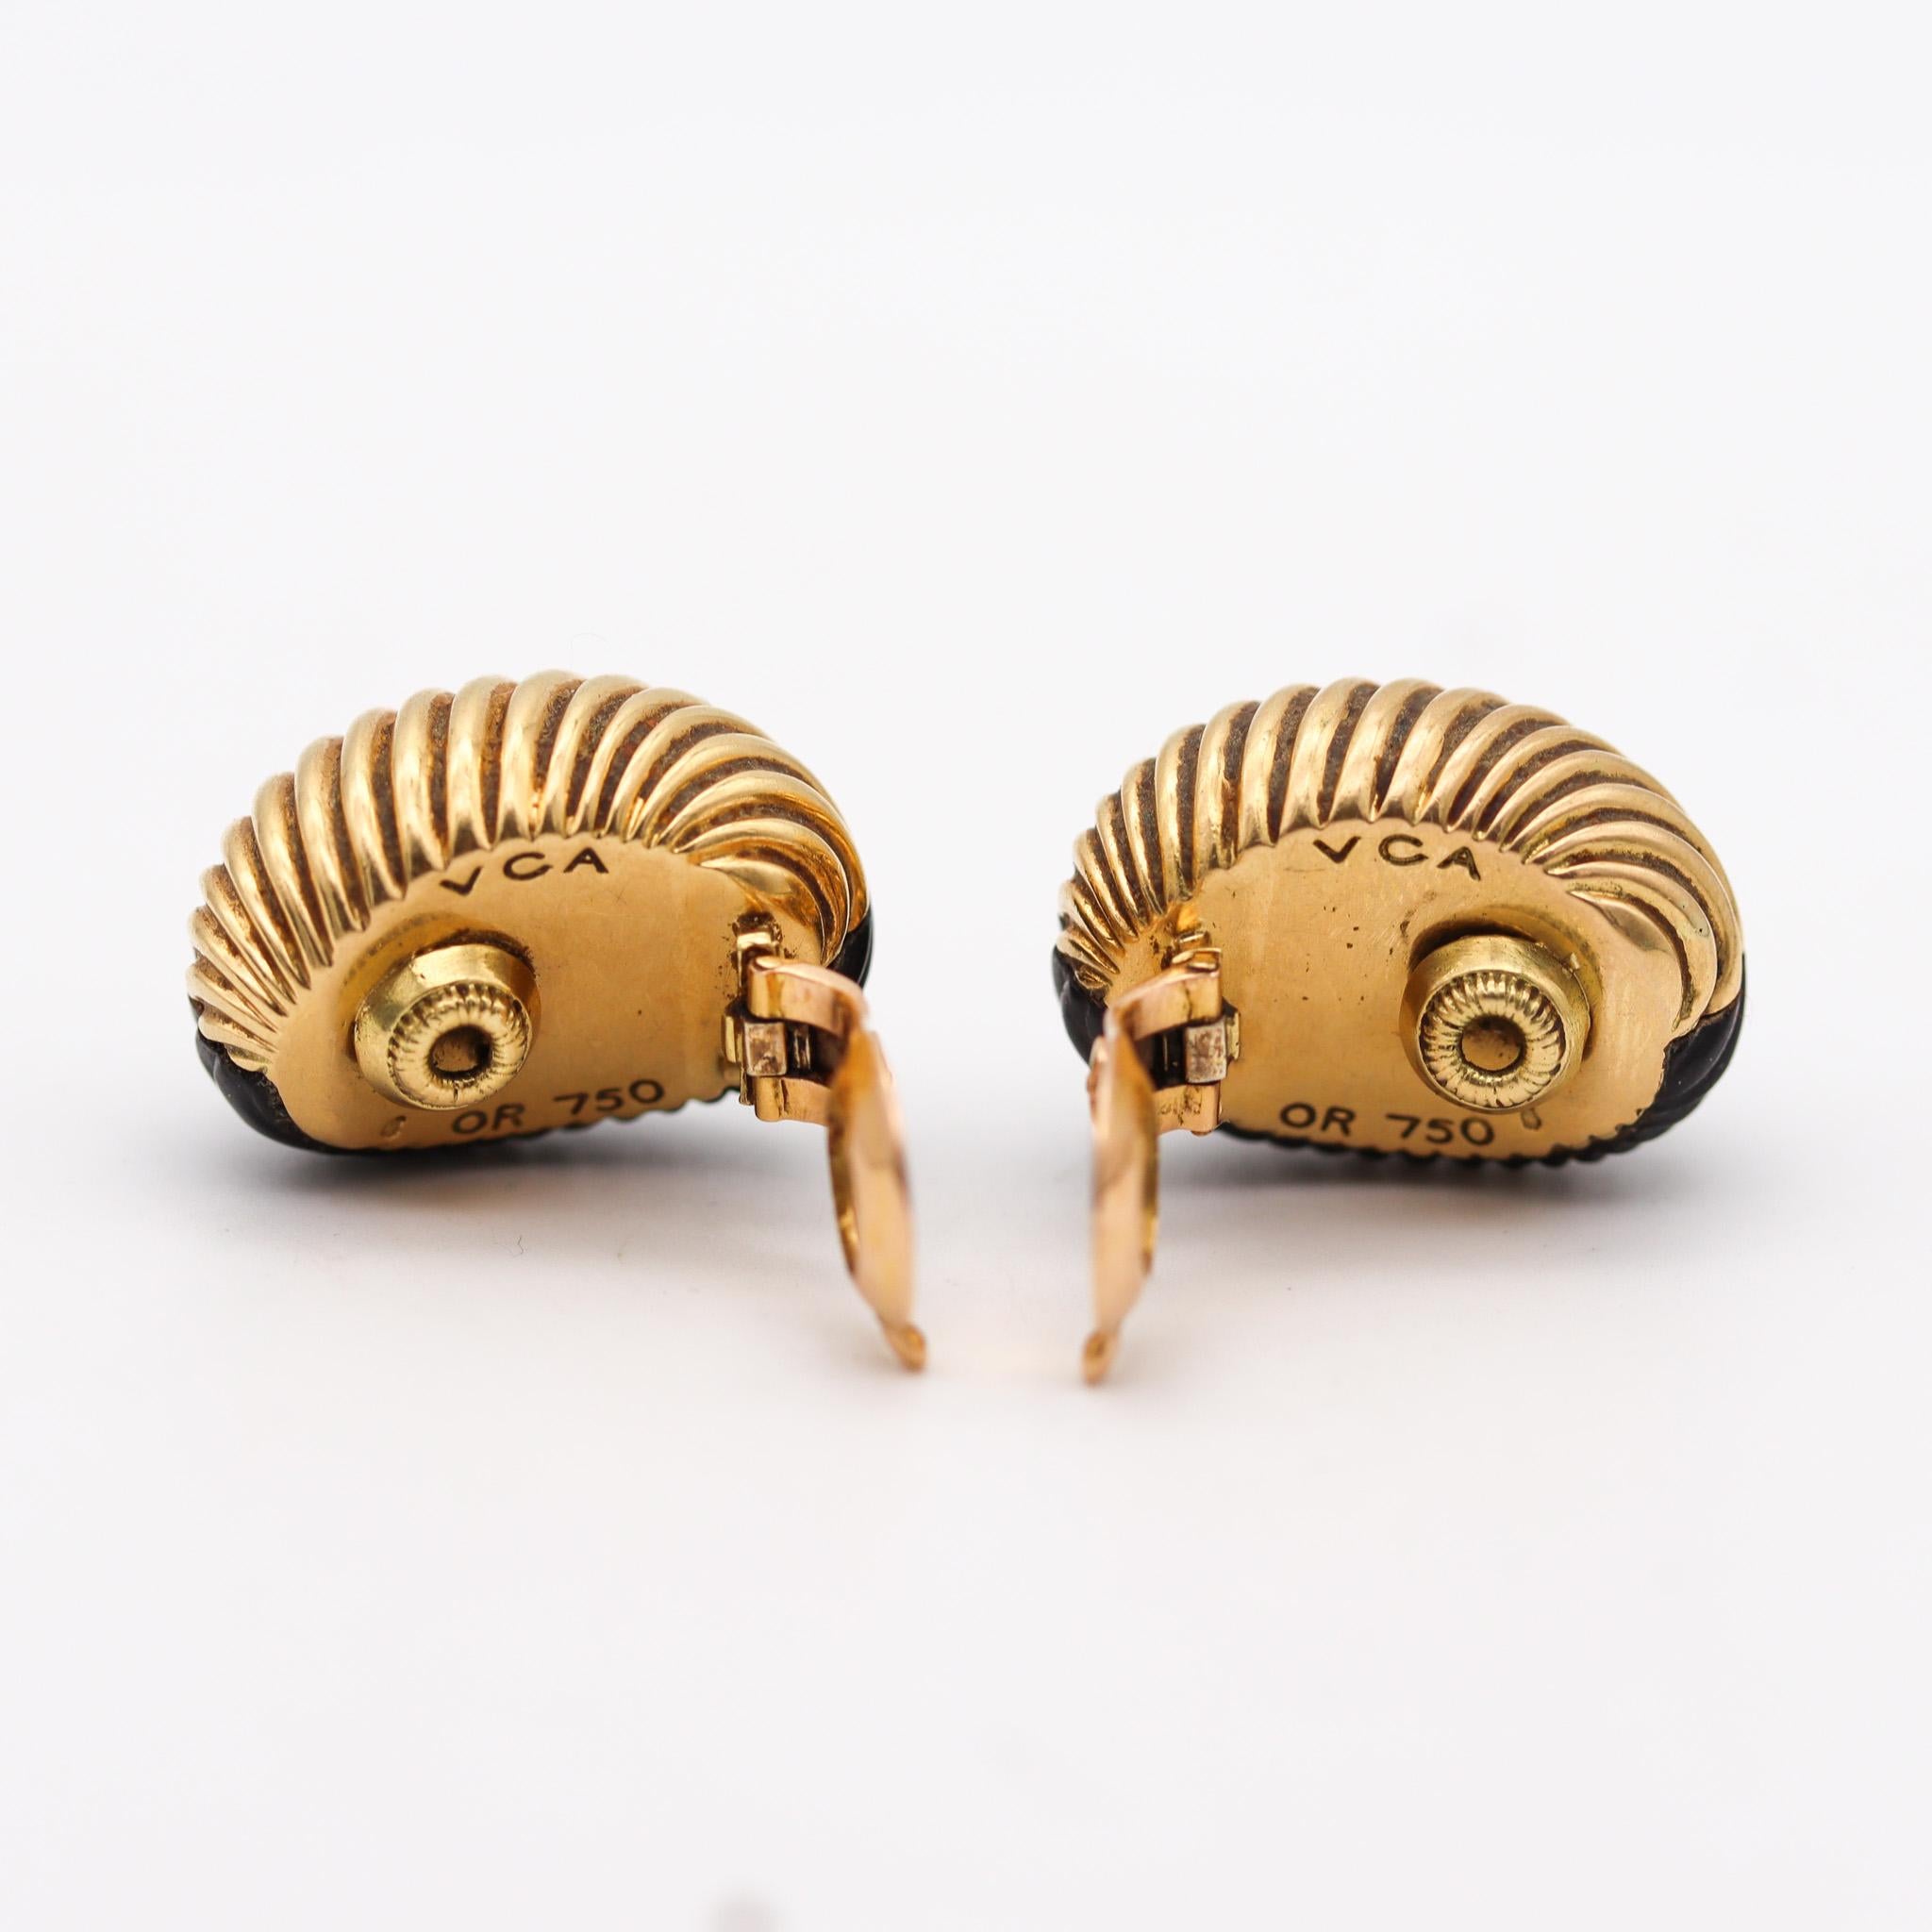 Modernist Van Cleef & Arpels 1970 Paris Clips On Earrings In 18Kt Gold With Carved Wood